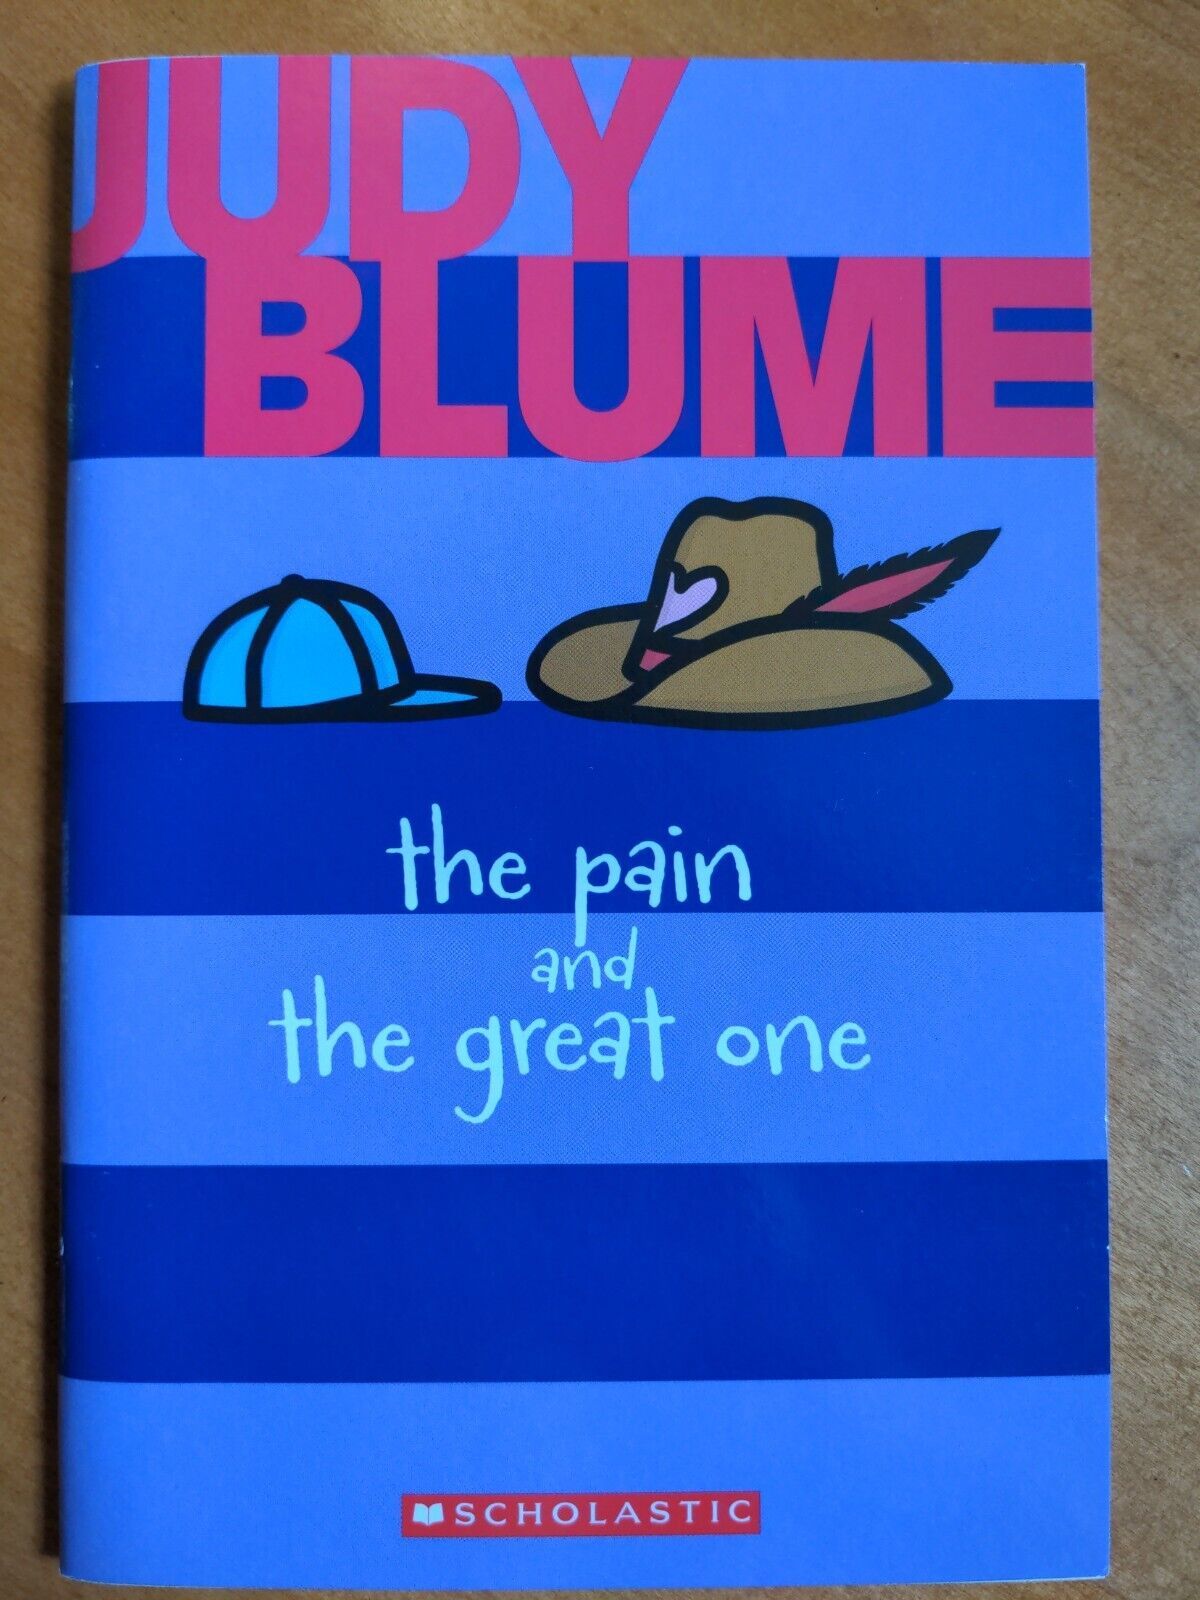 The Pain and the Great One by Judy Blume (2014, Trade Paperback)